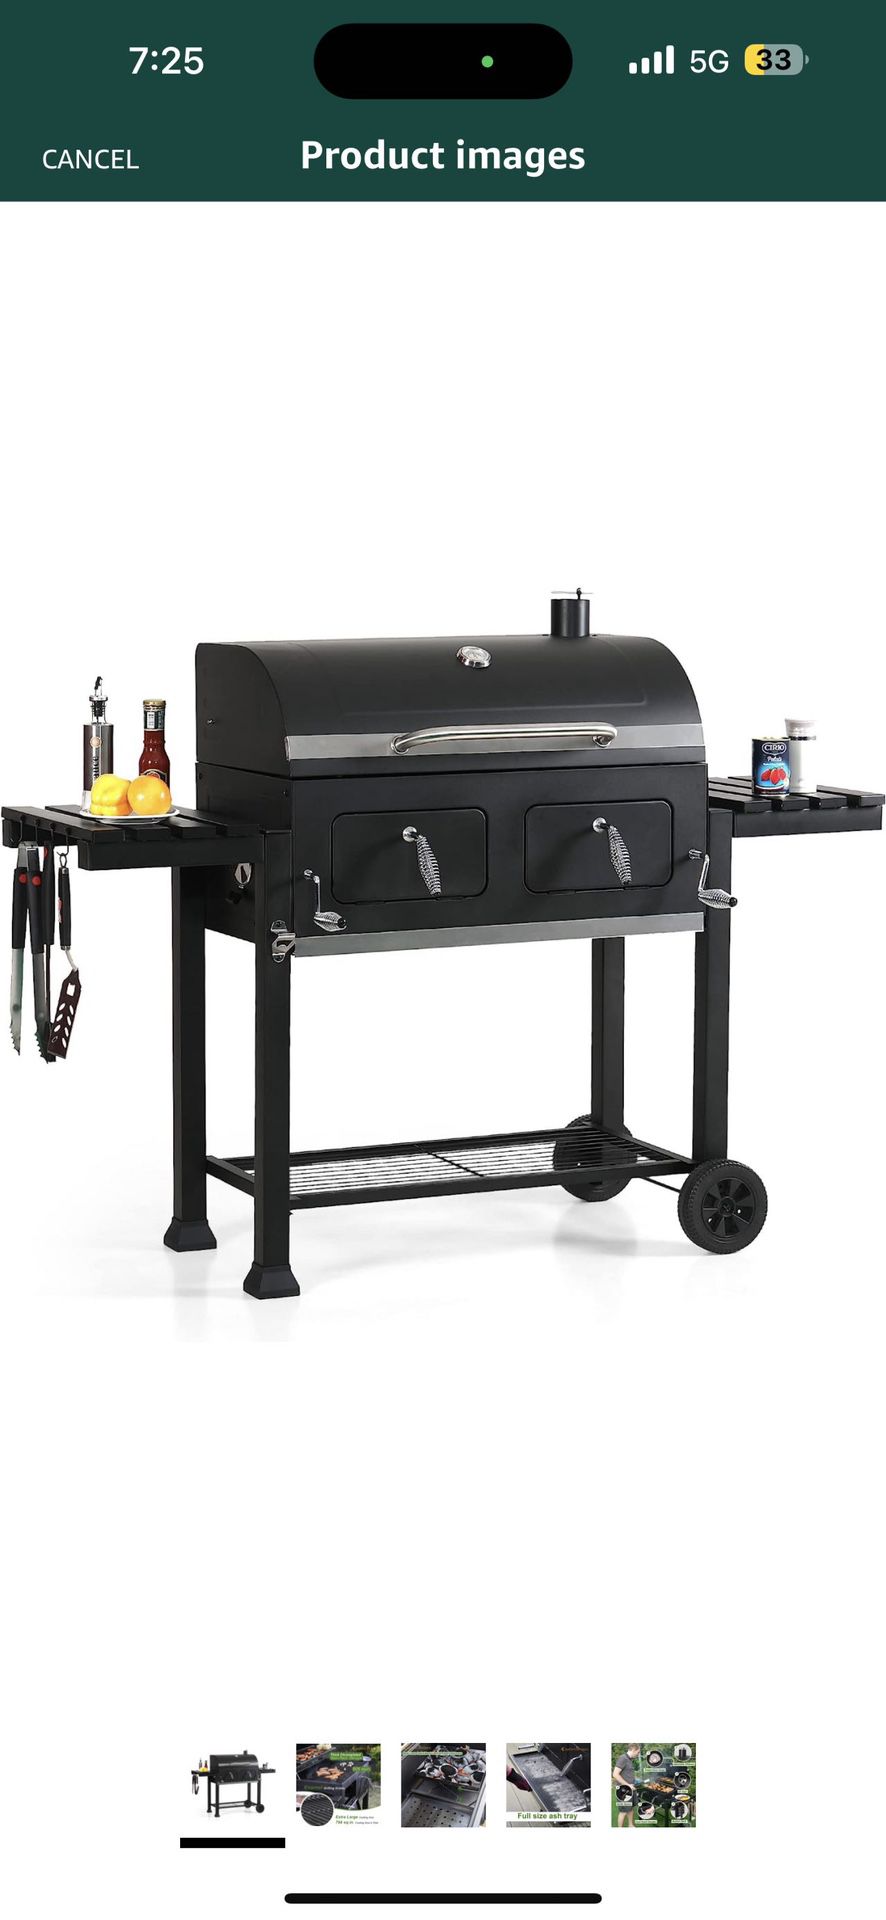  Designs Extra Large Charcoal BBQ Grill with Oversize Cooking Area(794 https://offerup.com/redirect/?o=c3EuaW4=.), Outdoor Cooking Grill with 2 Indivi